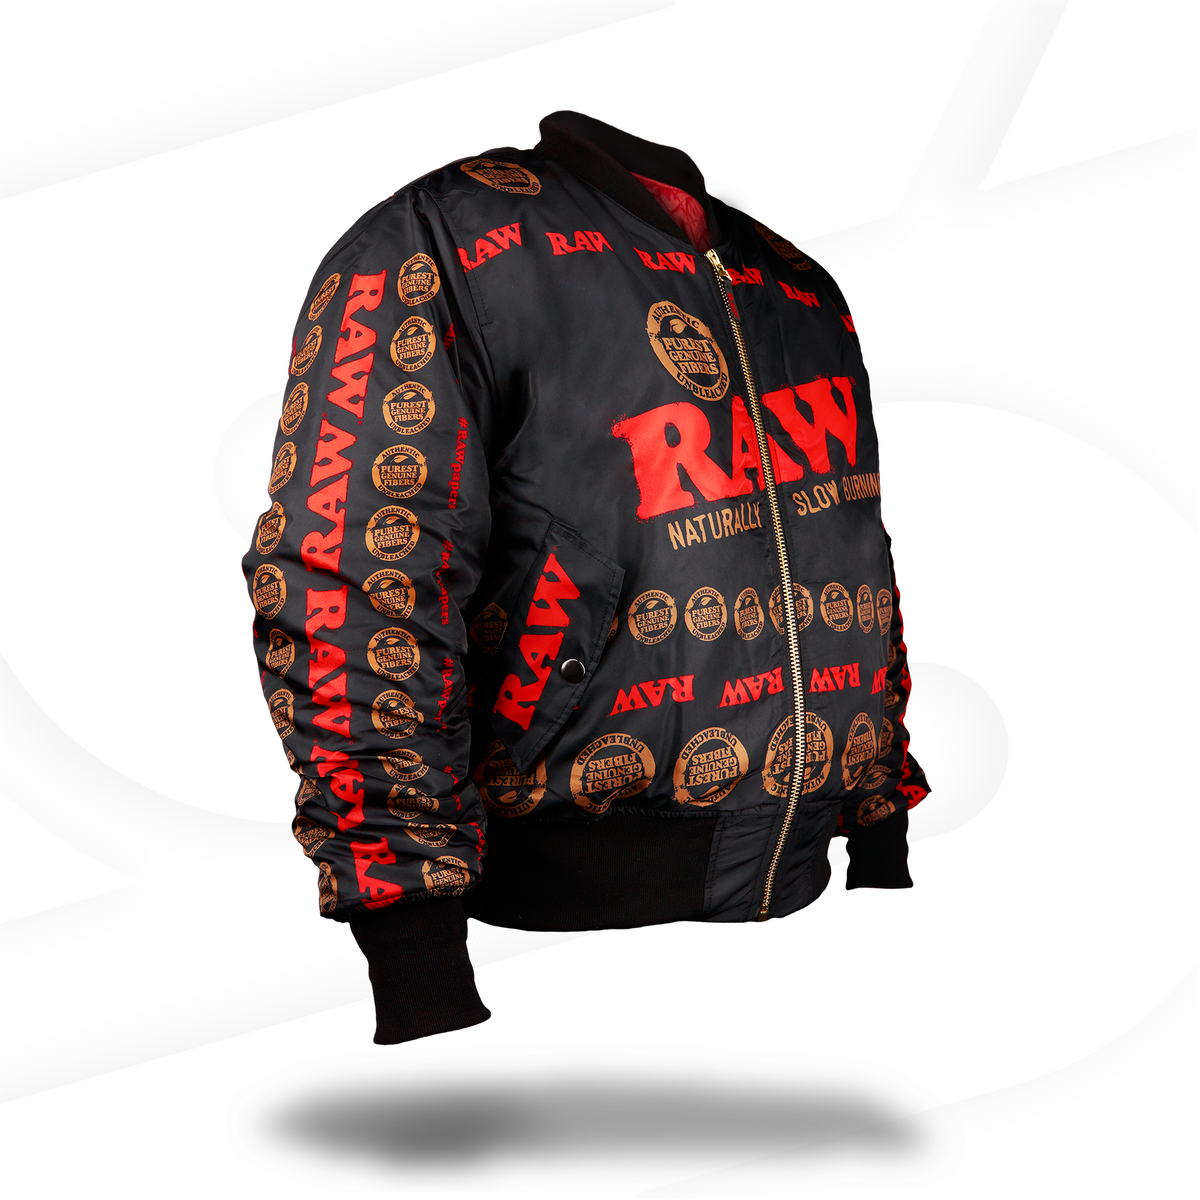 RAW Loud Flight Jacket Clothing Accessories esd-official